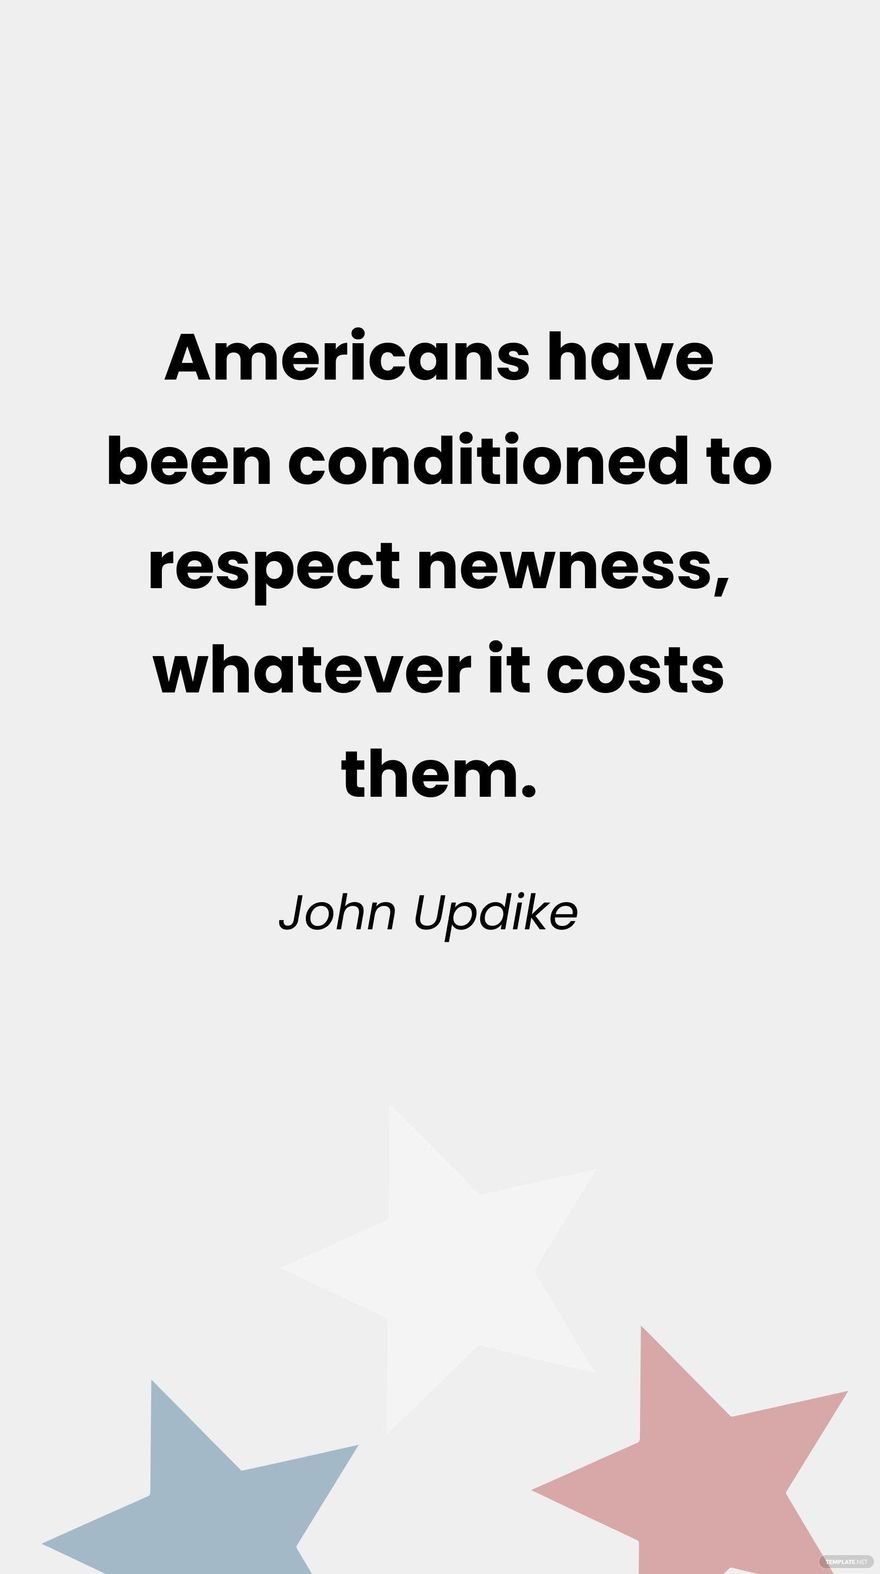 Free John Updike- Americans have been conditioned to respect newness, whatever it costs them.